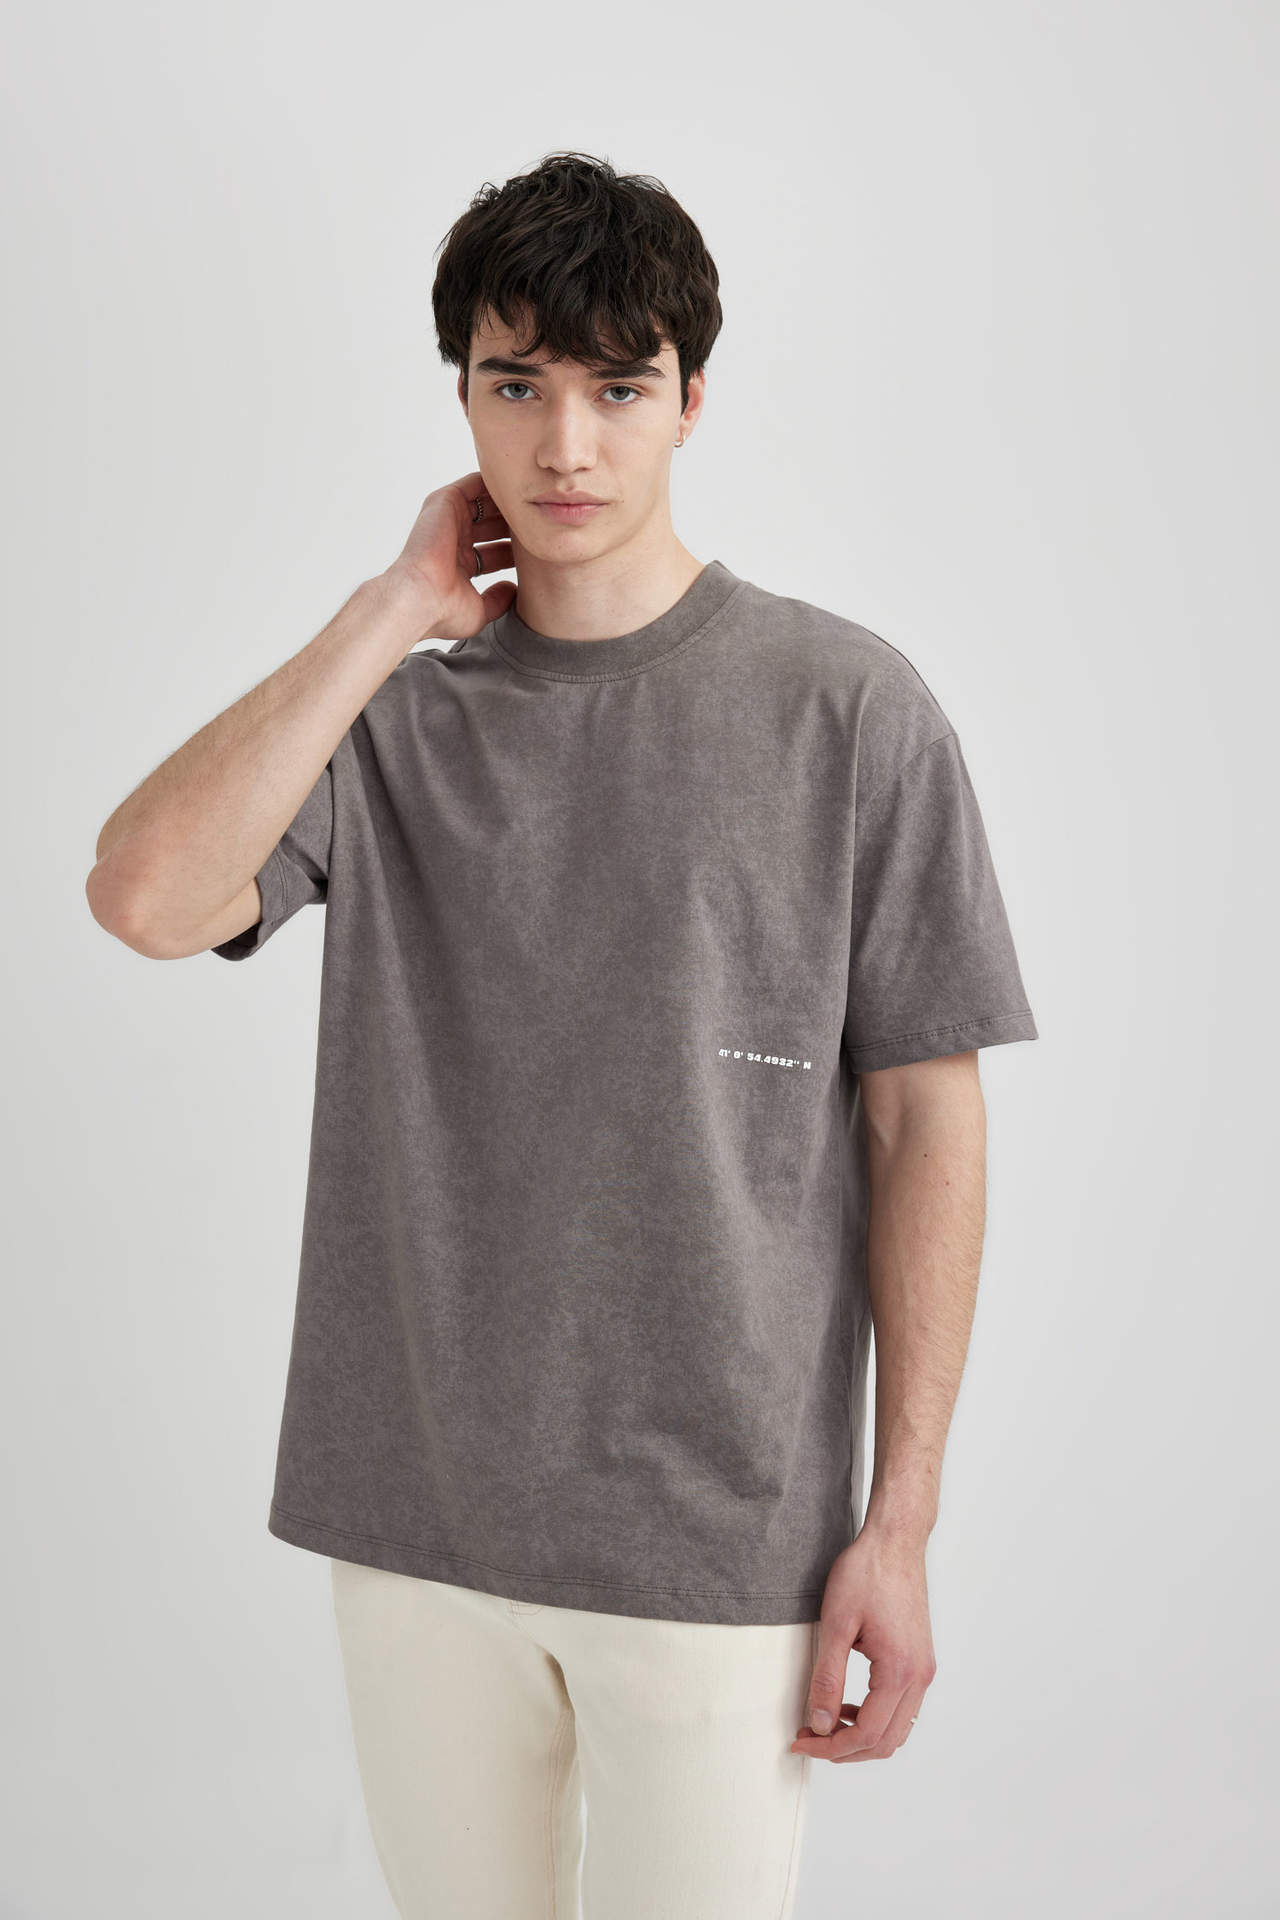 DEFACTO Boxy Fit Crew Neck Printed T-Shirt